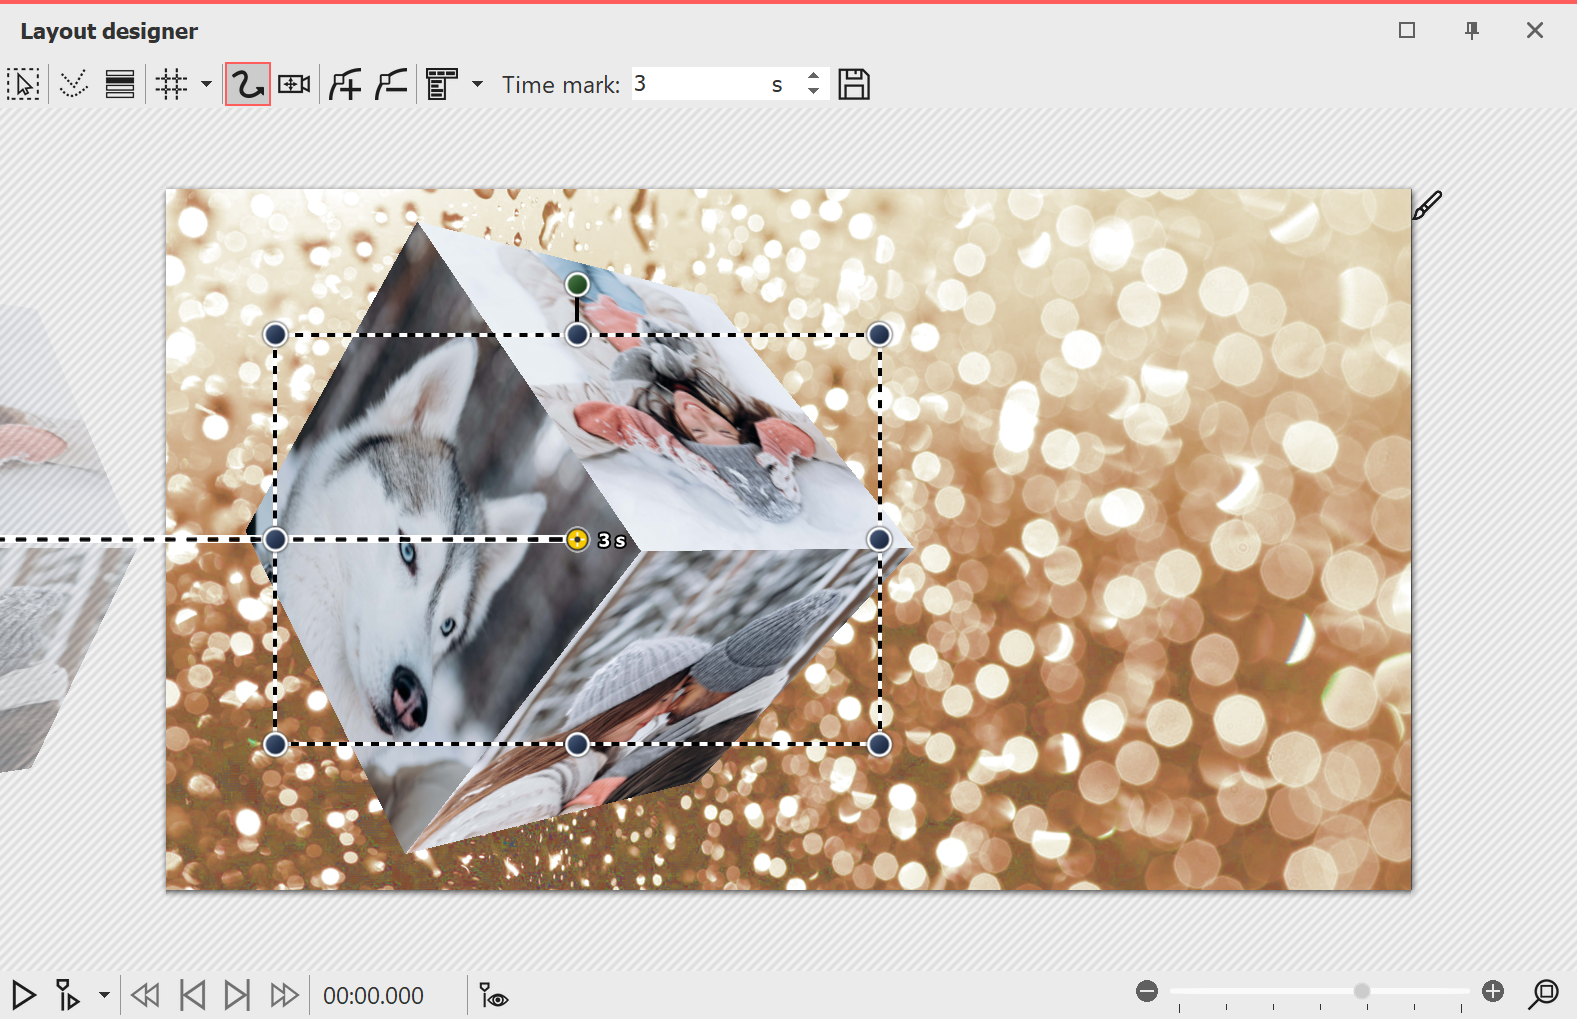 Effect 3D cube in Layout designer